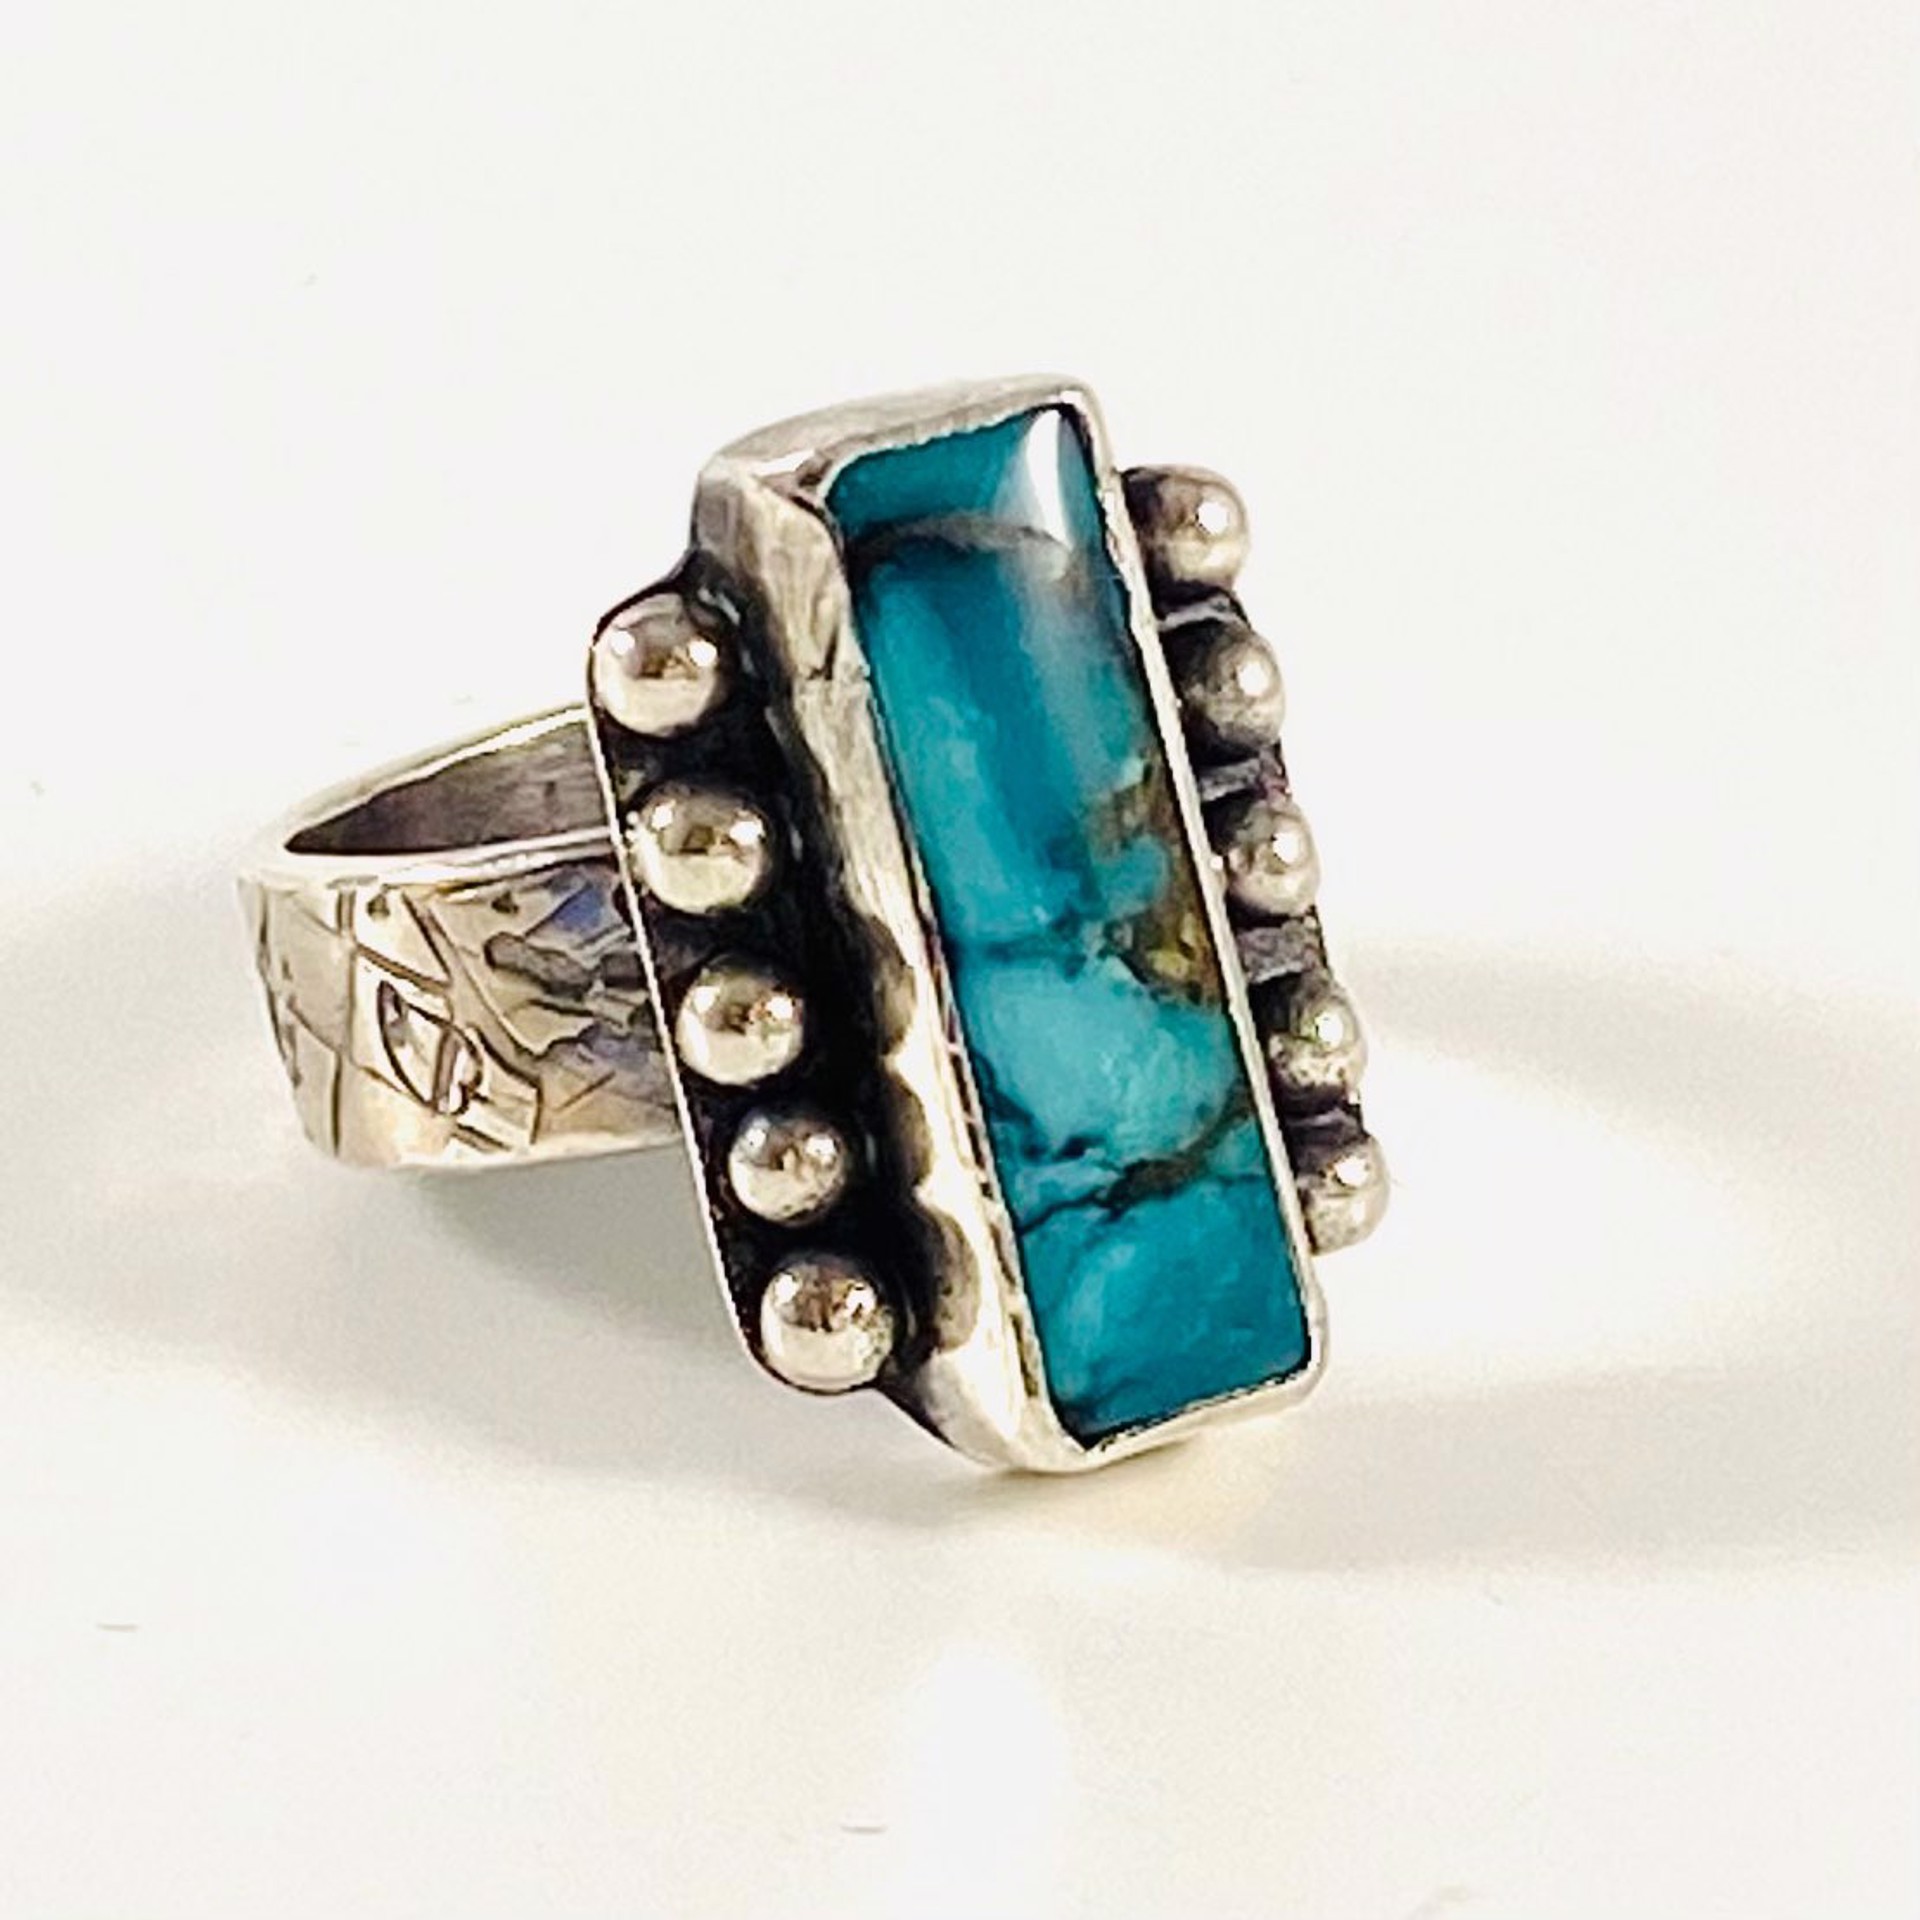 AB22-30 Arizona Turquoise Ring sz9 by Anne Bivens